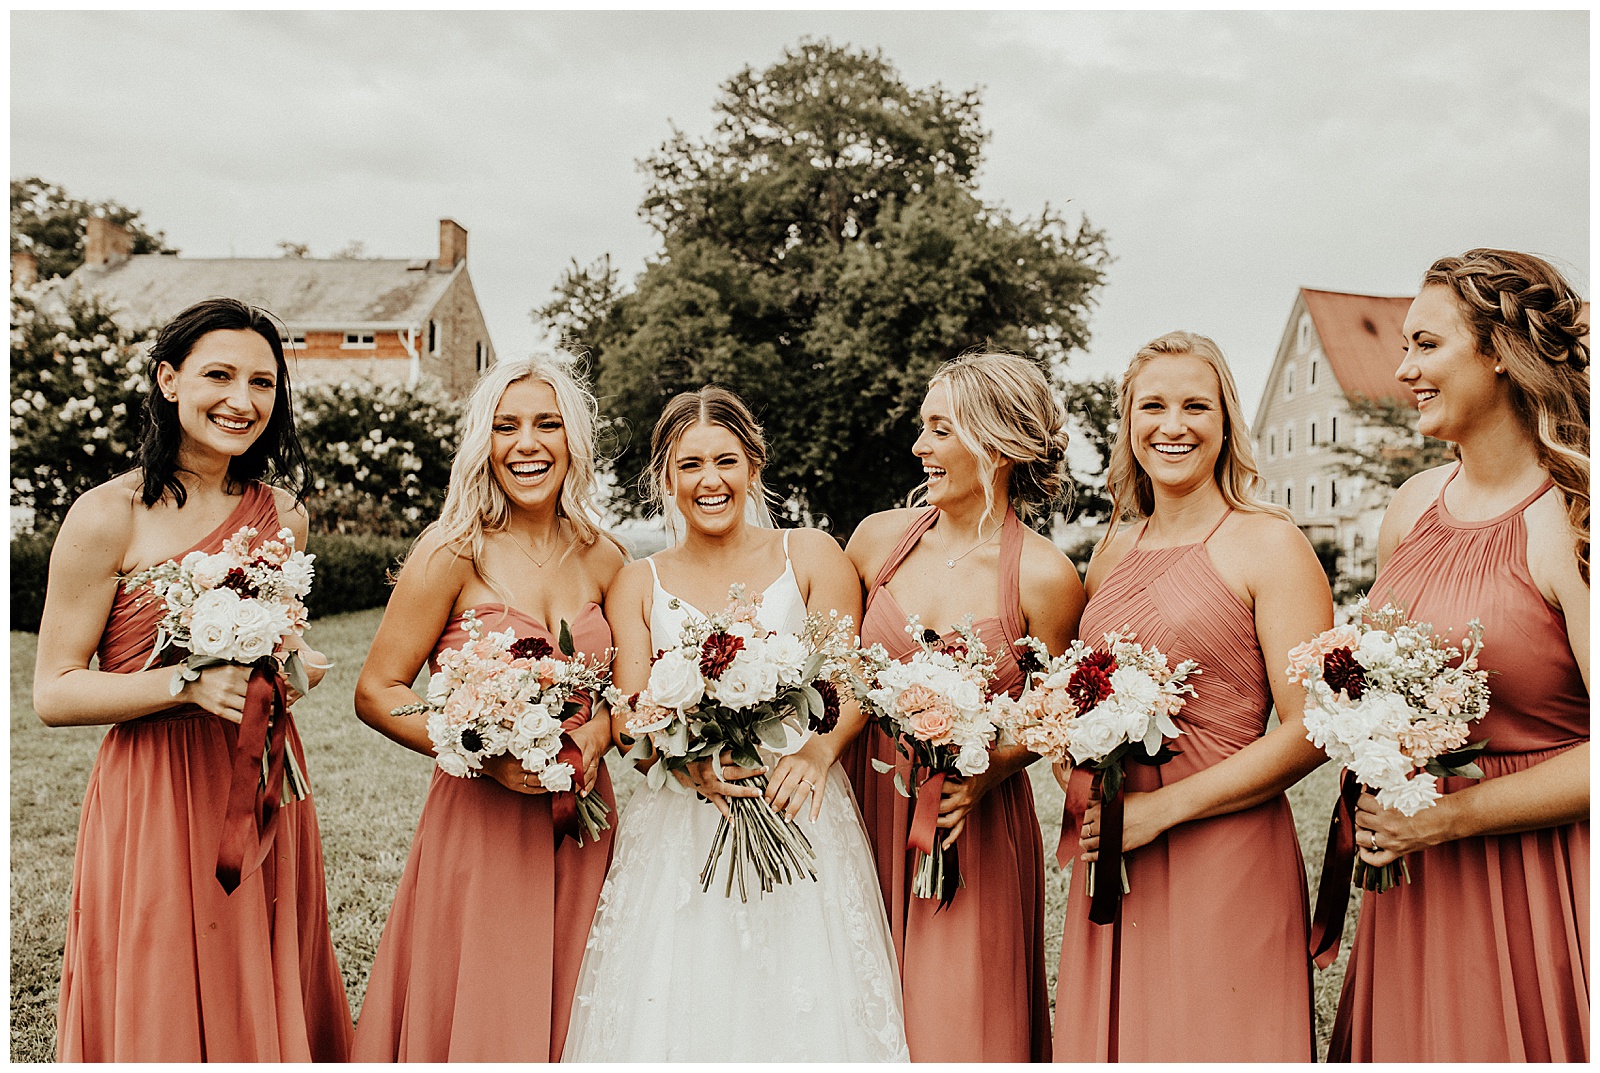 bridal party at an intimate winery wedding in maryland captured by Brey Photo, delaware county photographer